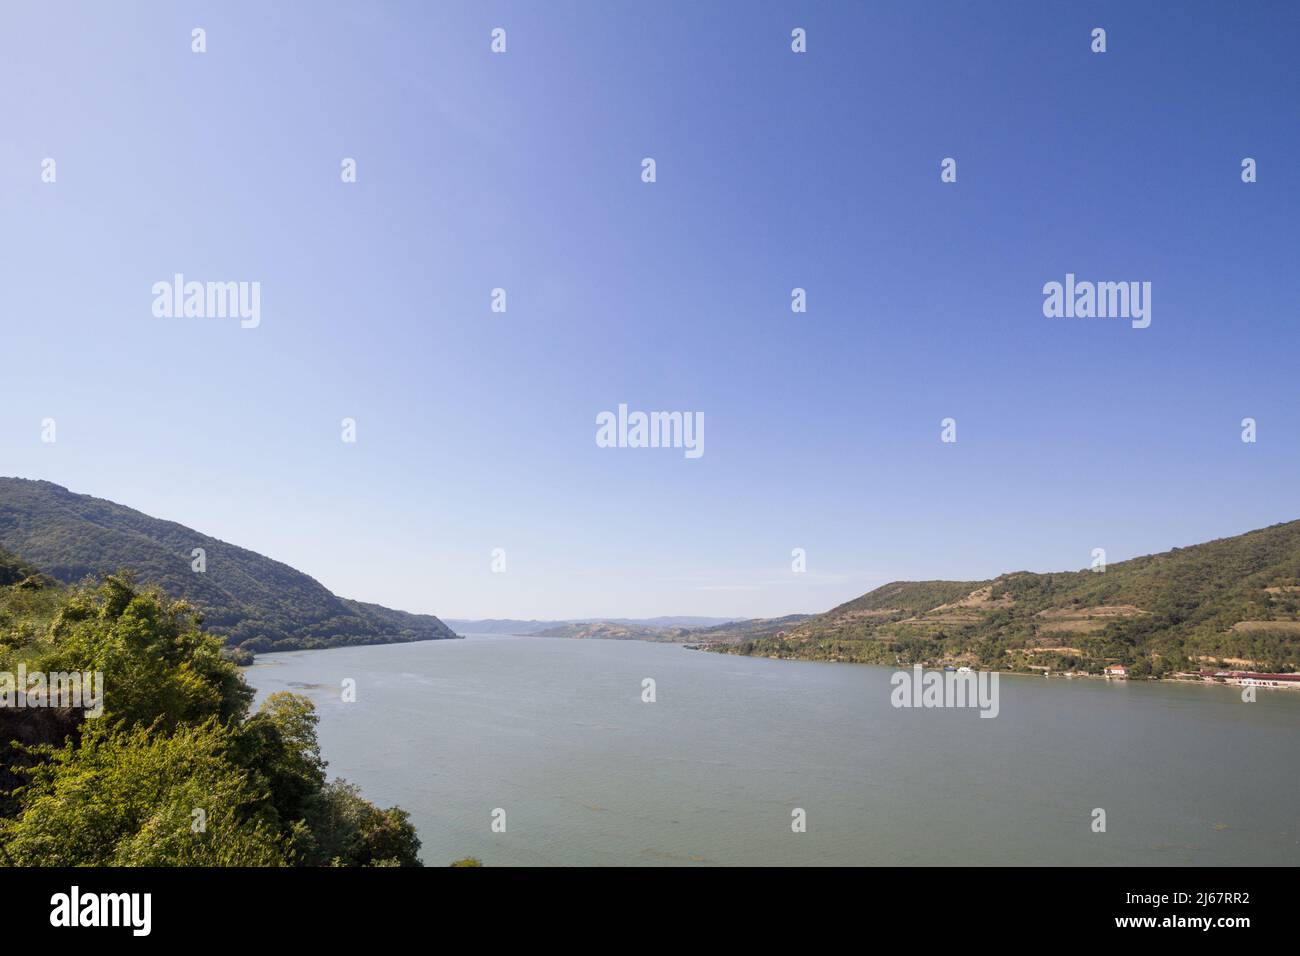 Picture of Danube river in Djerdap, also known as Iron Gates or Portile din Fier. The Iron Gates is a gorge on the Danube River. It forms part of the Stock Photo